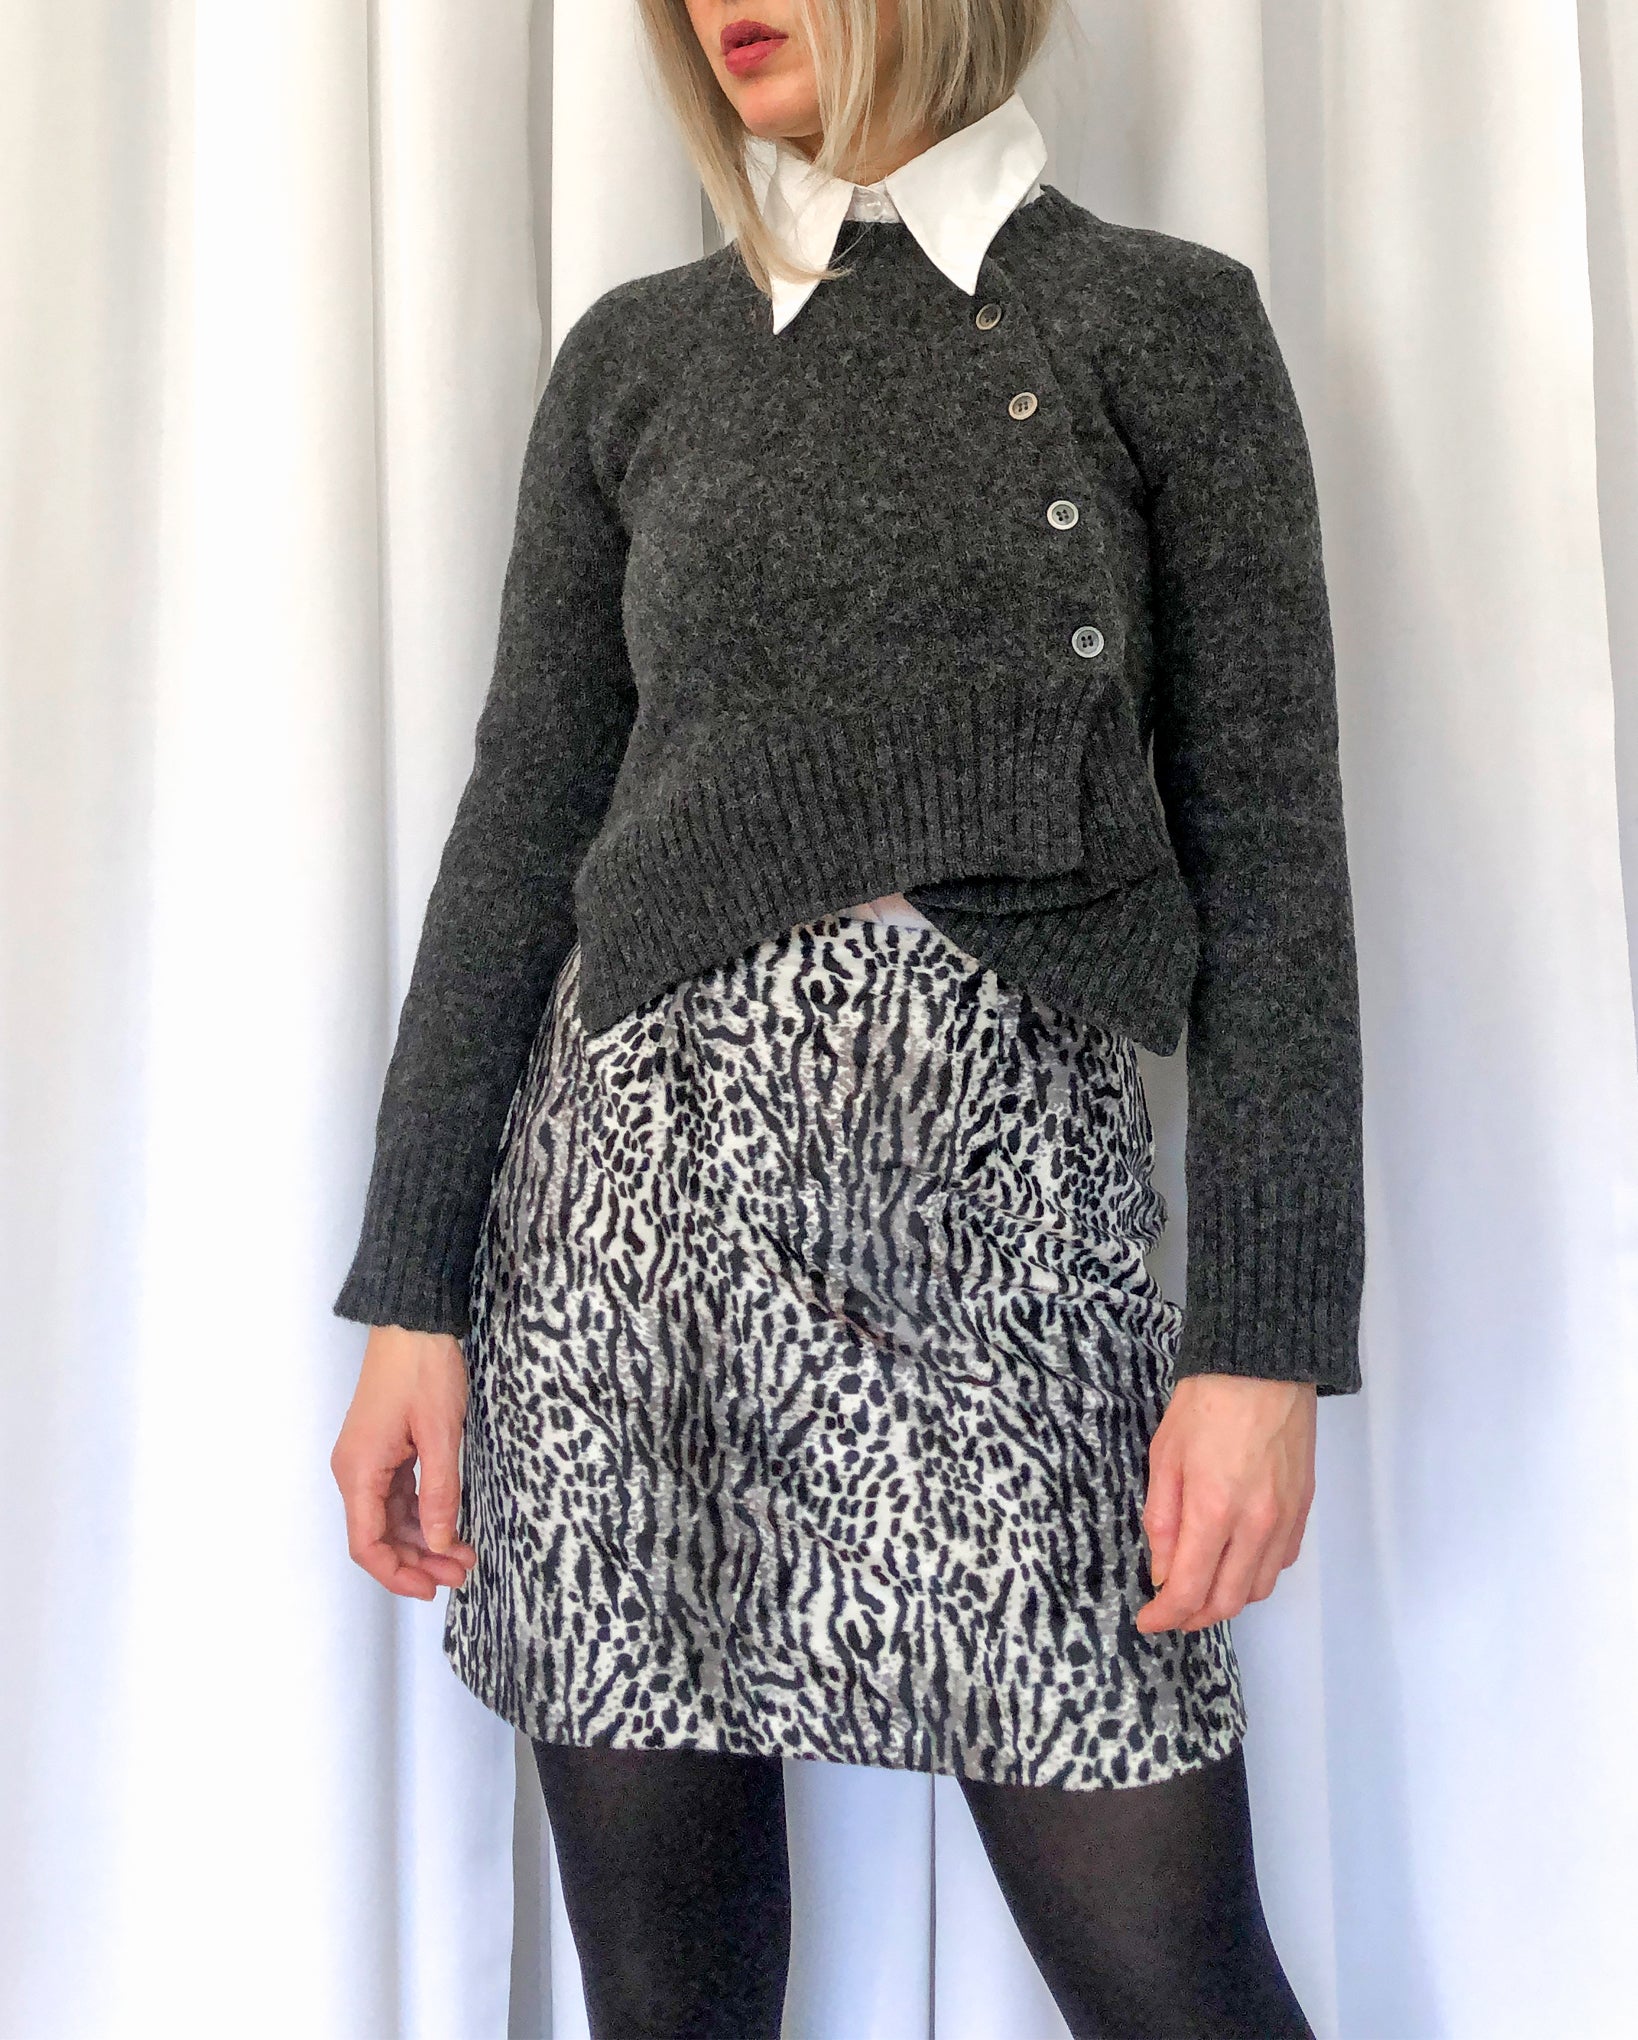 Vintage 90s Le Chateau Faux Fur Mini Skirt With High Waist And Animal Print, 26" Waist, Made In Canada